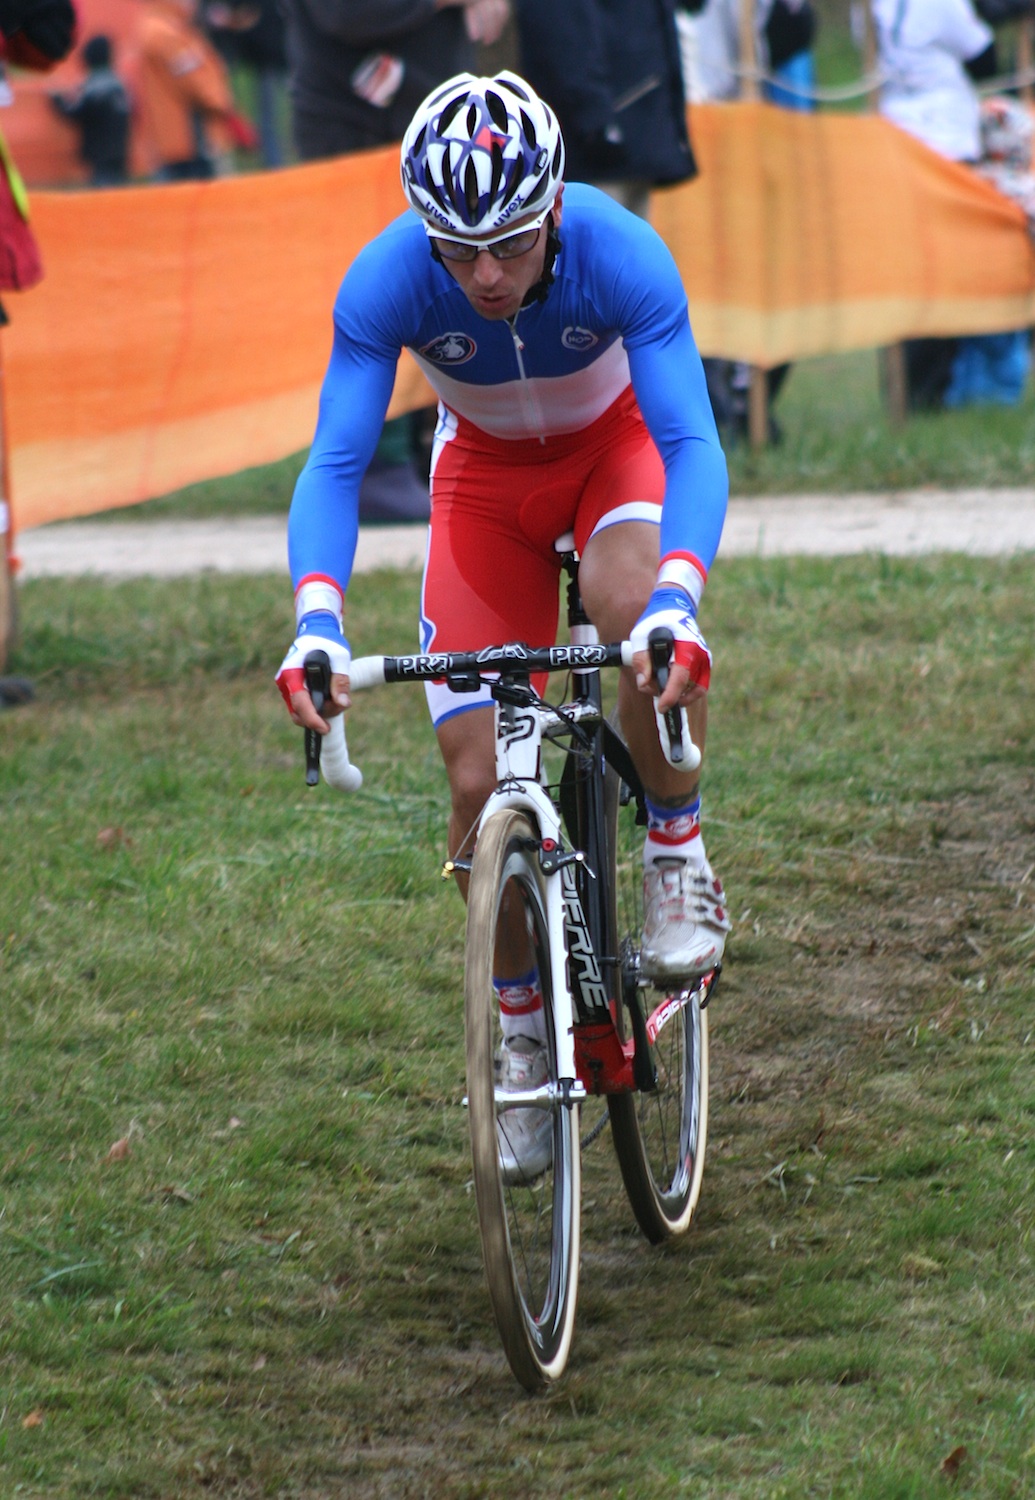 French national champion Francis Mourey took the win Saturday at Nommay Cyclocross. Renner Custom CX Team